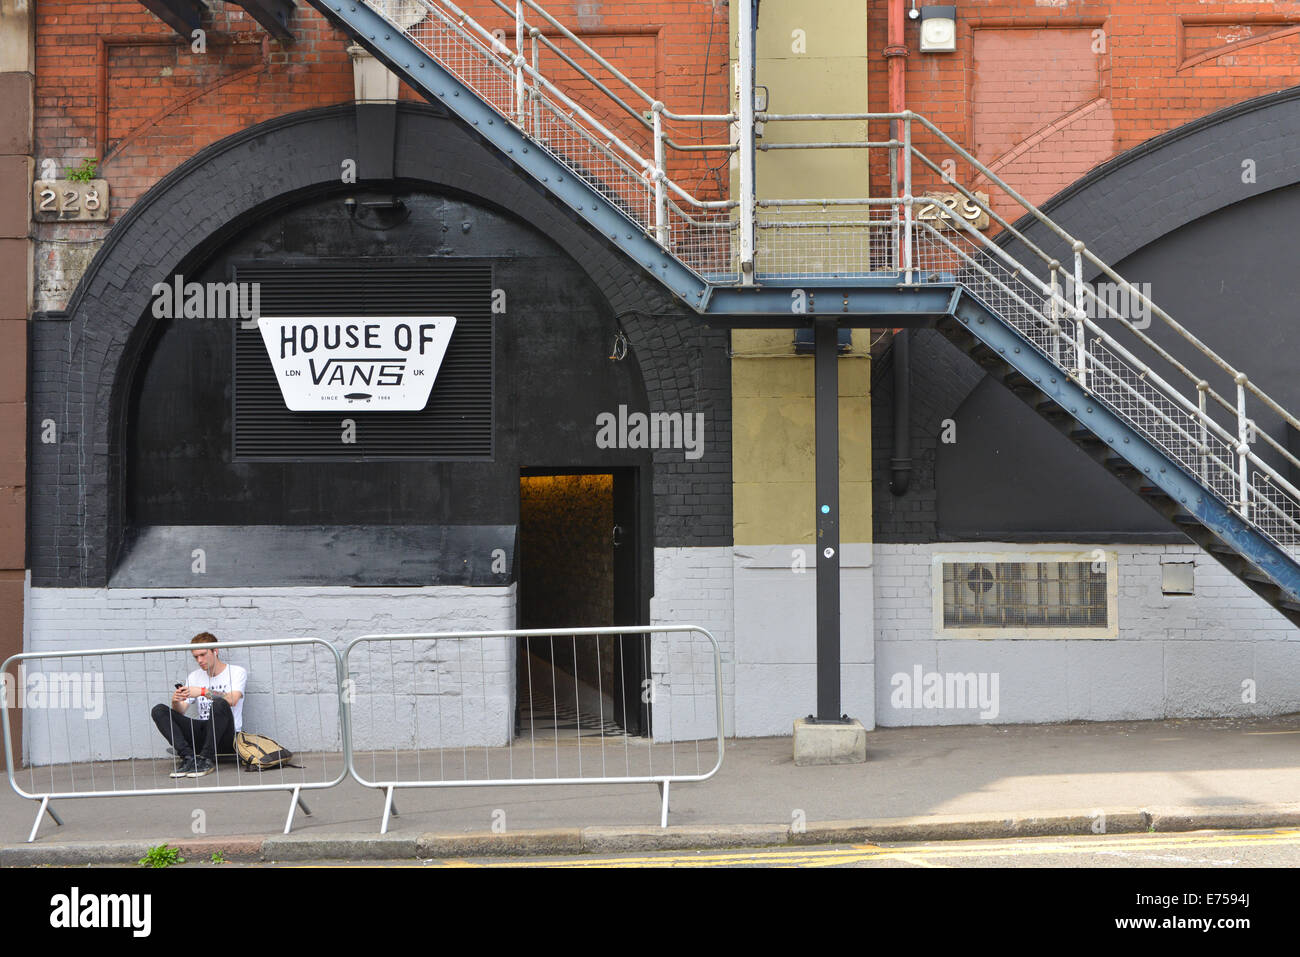 Waterloo Station, London, UK. 7th September 2014. House of Vans, a 3000 square meter space built in the Old Vic Tunnels at Waterloo, with a music venue, art gallery, artists studios, cafe, cinema, bar, and the skatepark. Credit:  Matthew Chattle/Alamy Live News Stock Photo